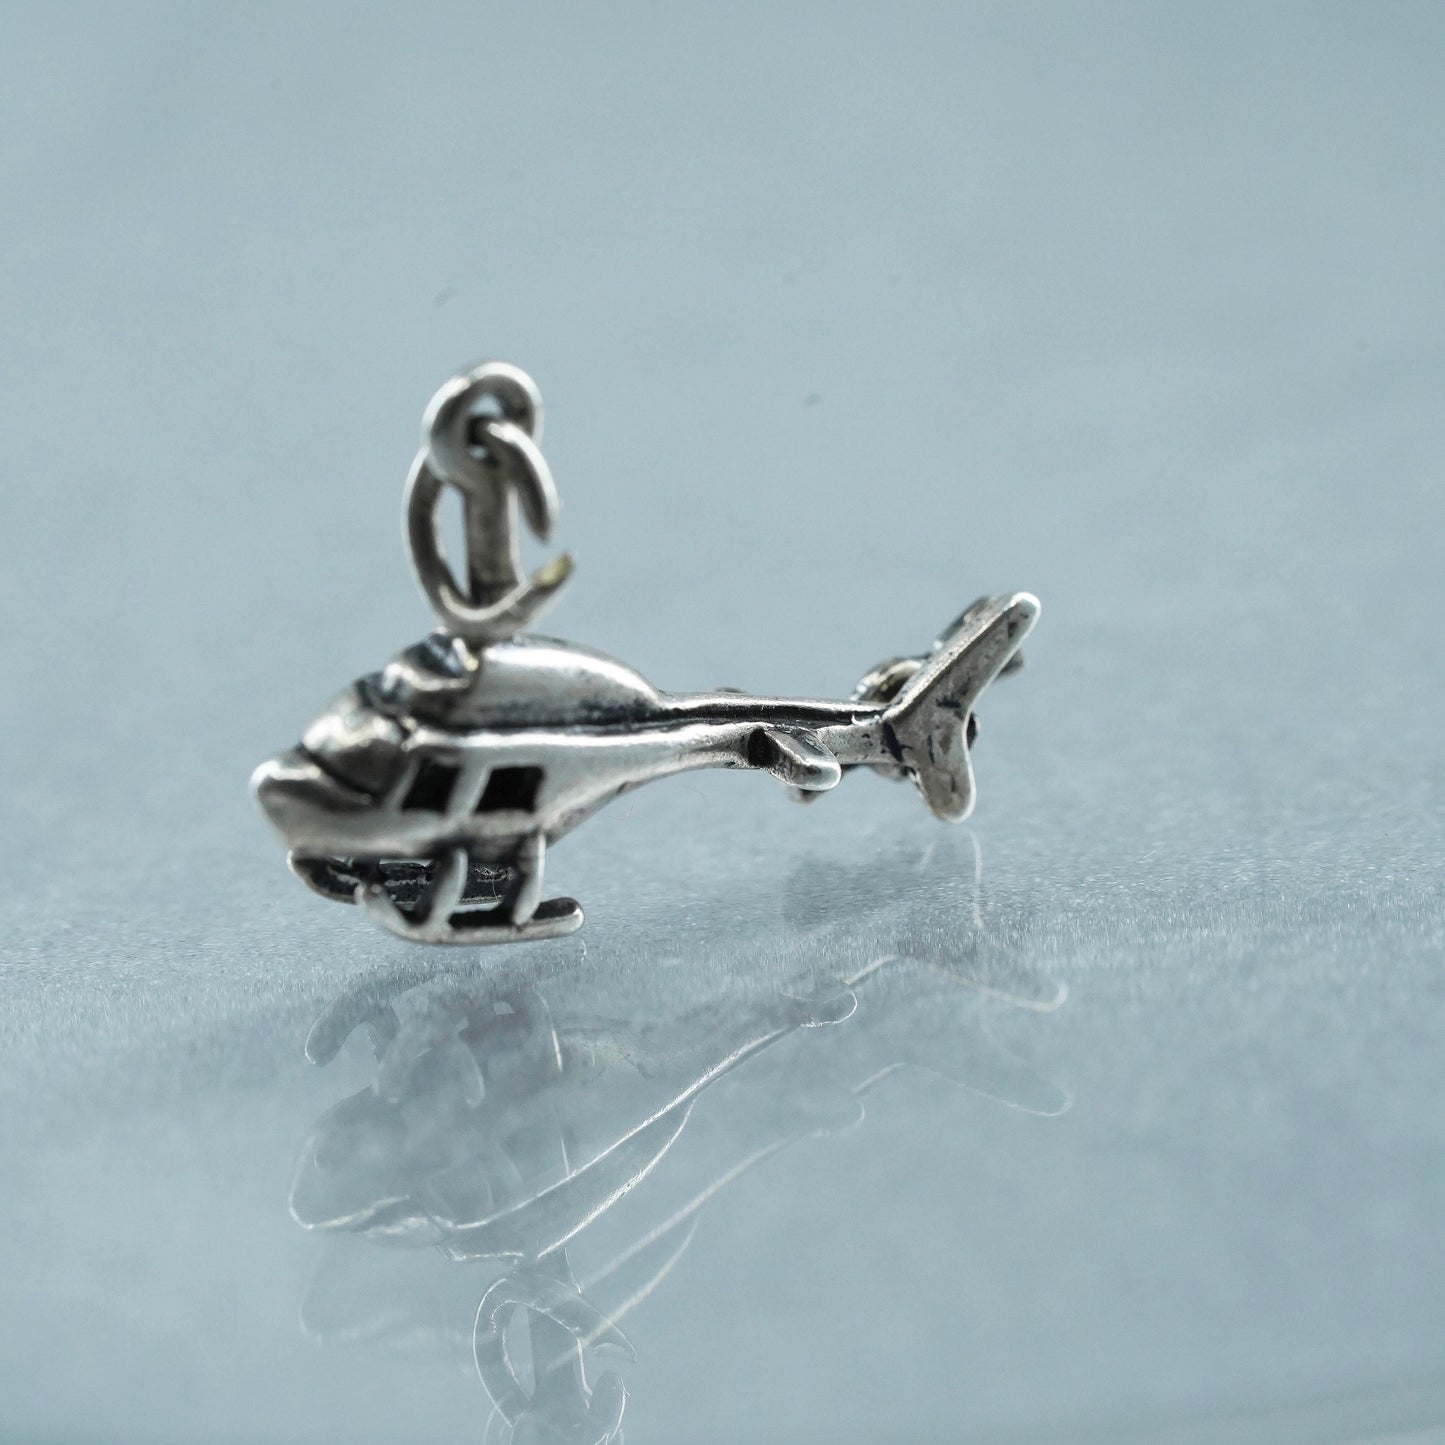 Vintage Sterling silver handmade simple 925 helicopter airplane charm pendant